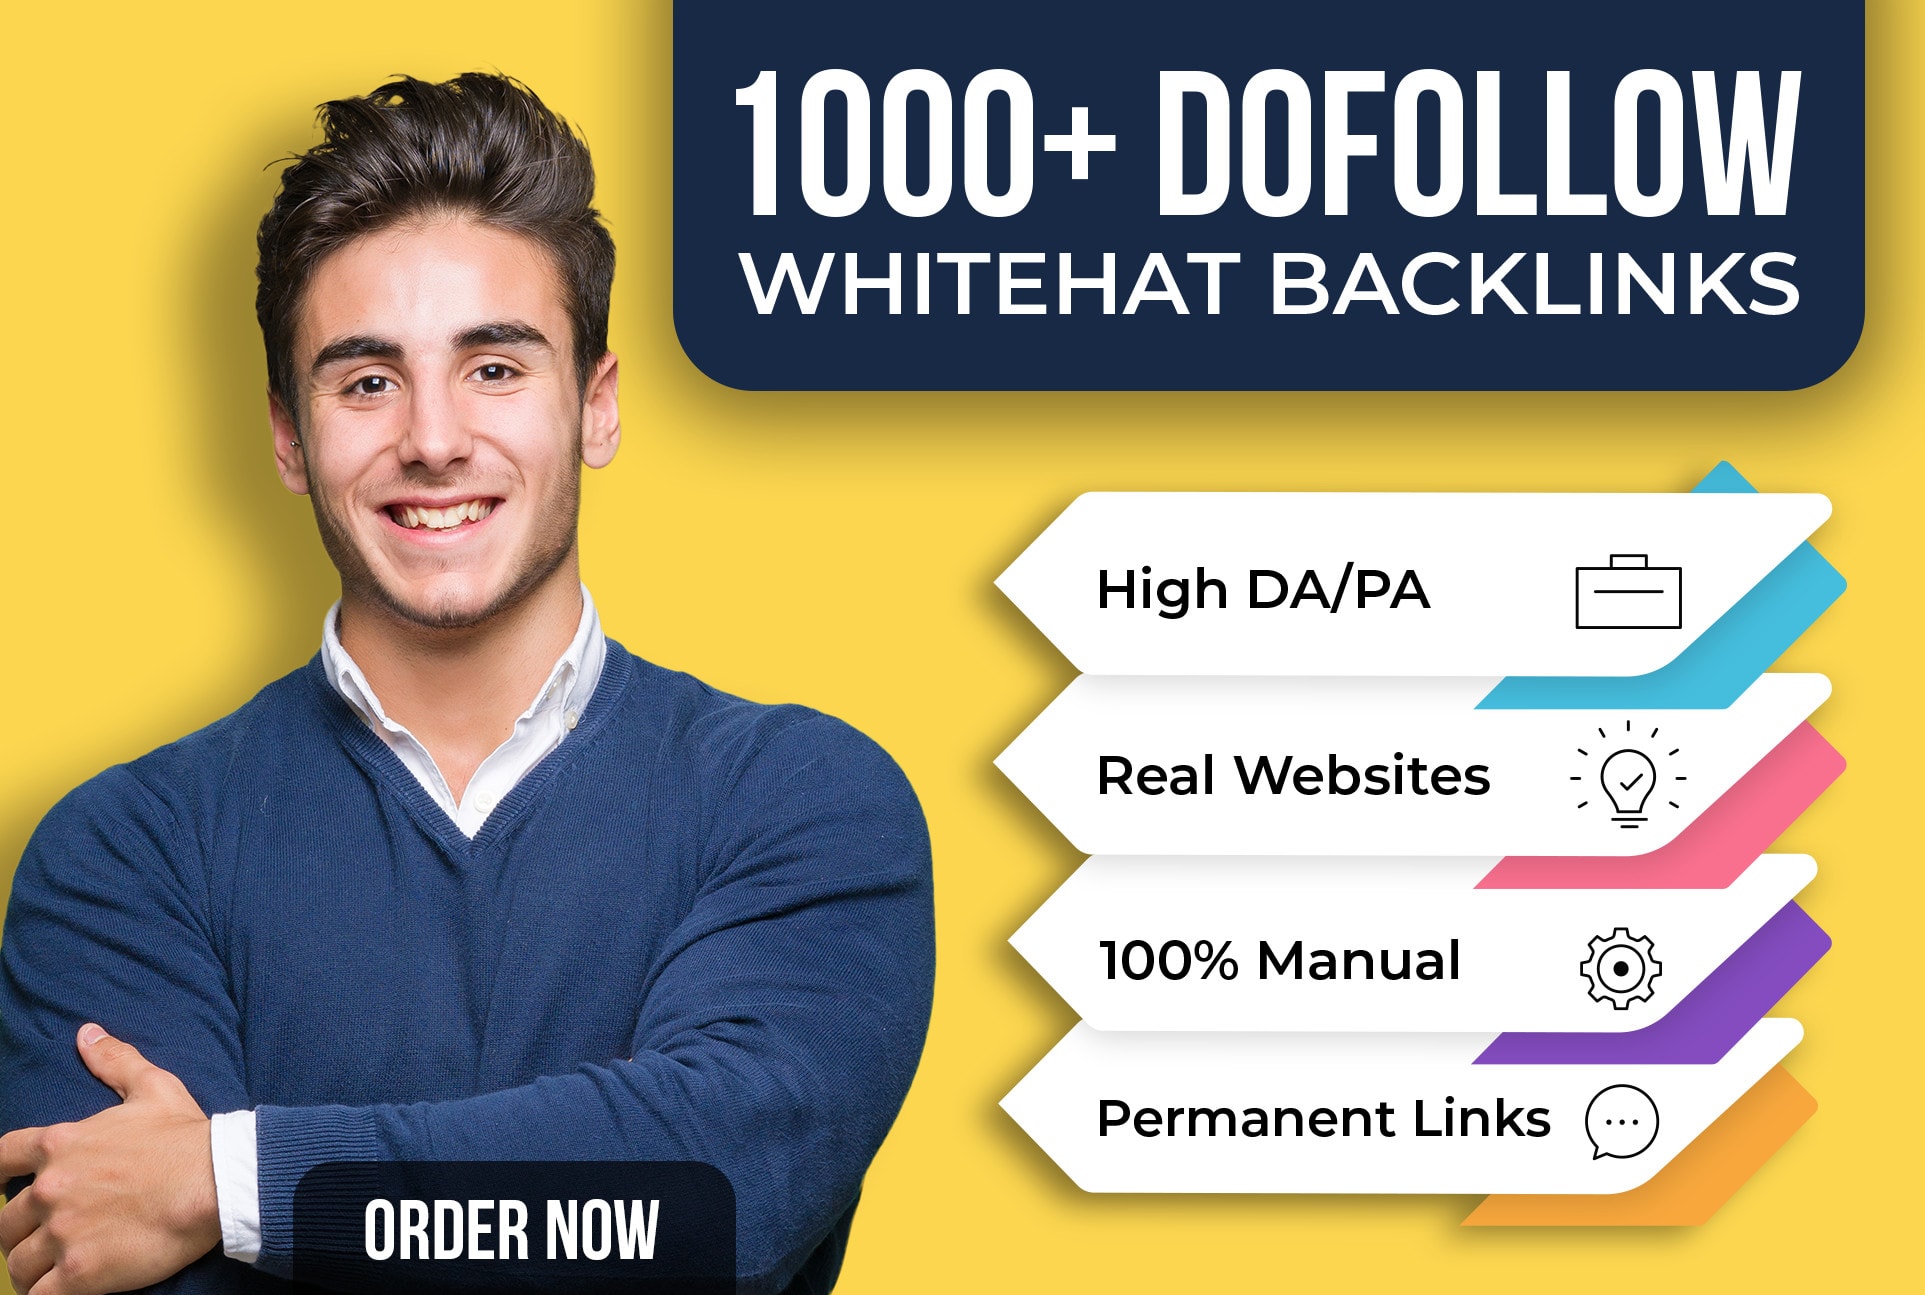 23968offer SEO service for whitehat dofollow and contextual backlinks